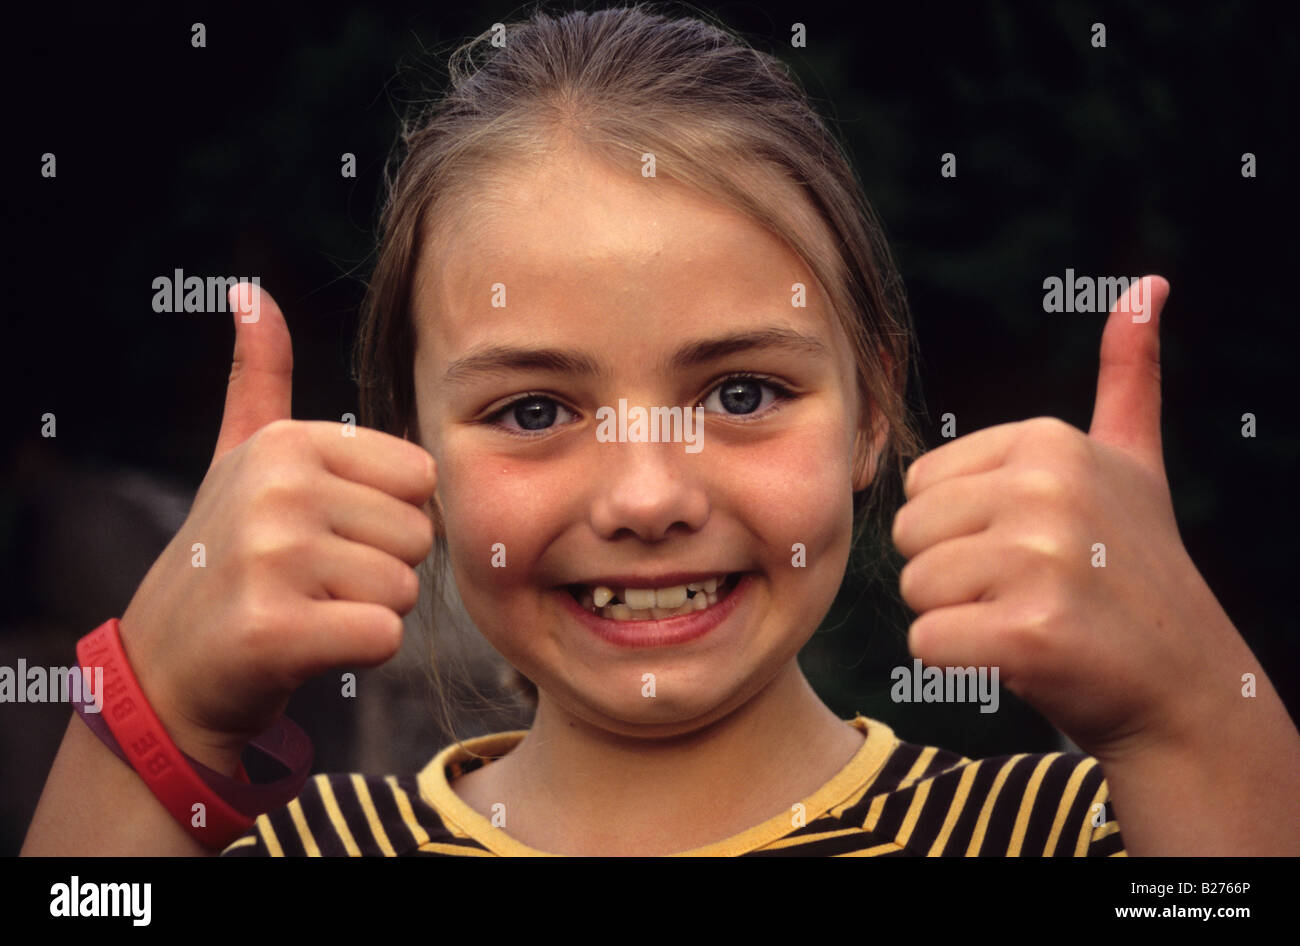 Young Girl Giving Thumbs Up Ok Sign Stock Photo